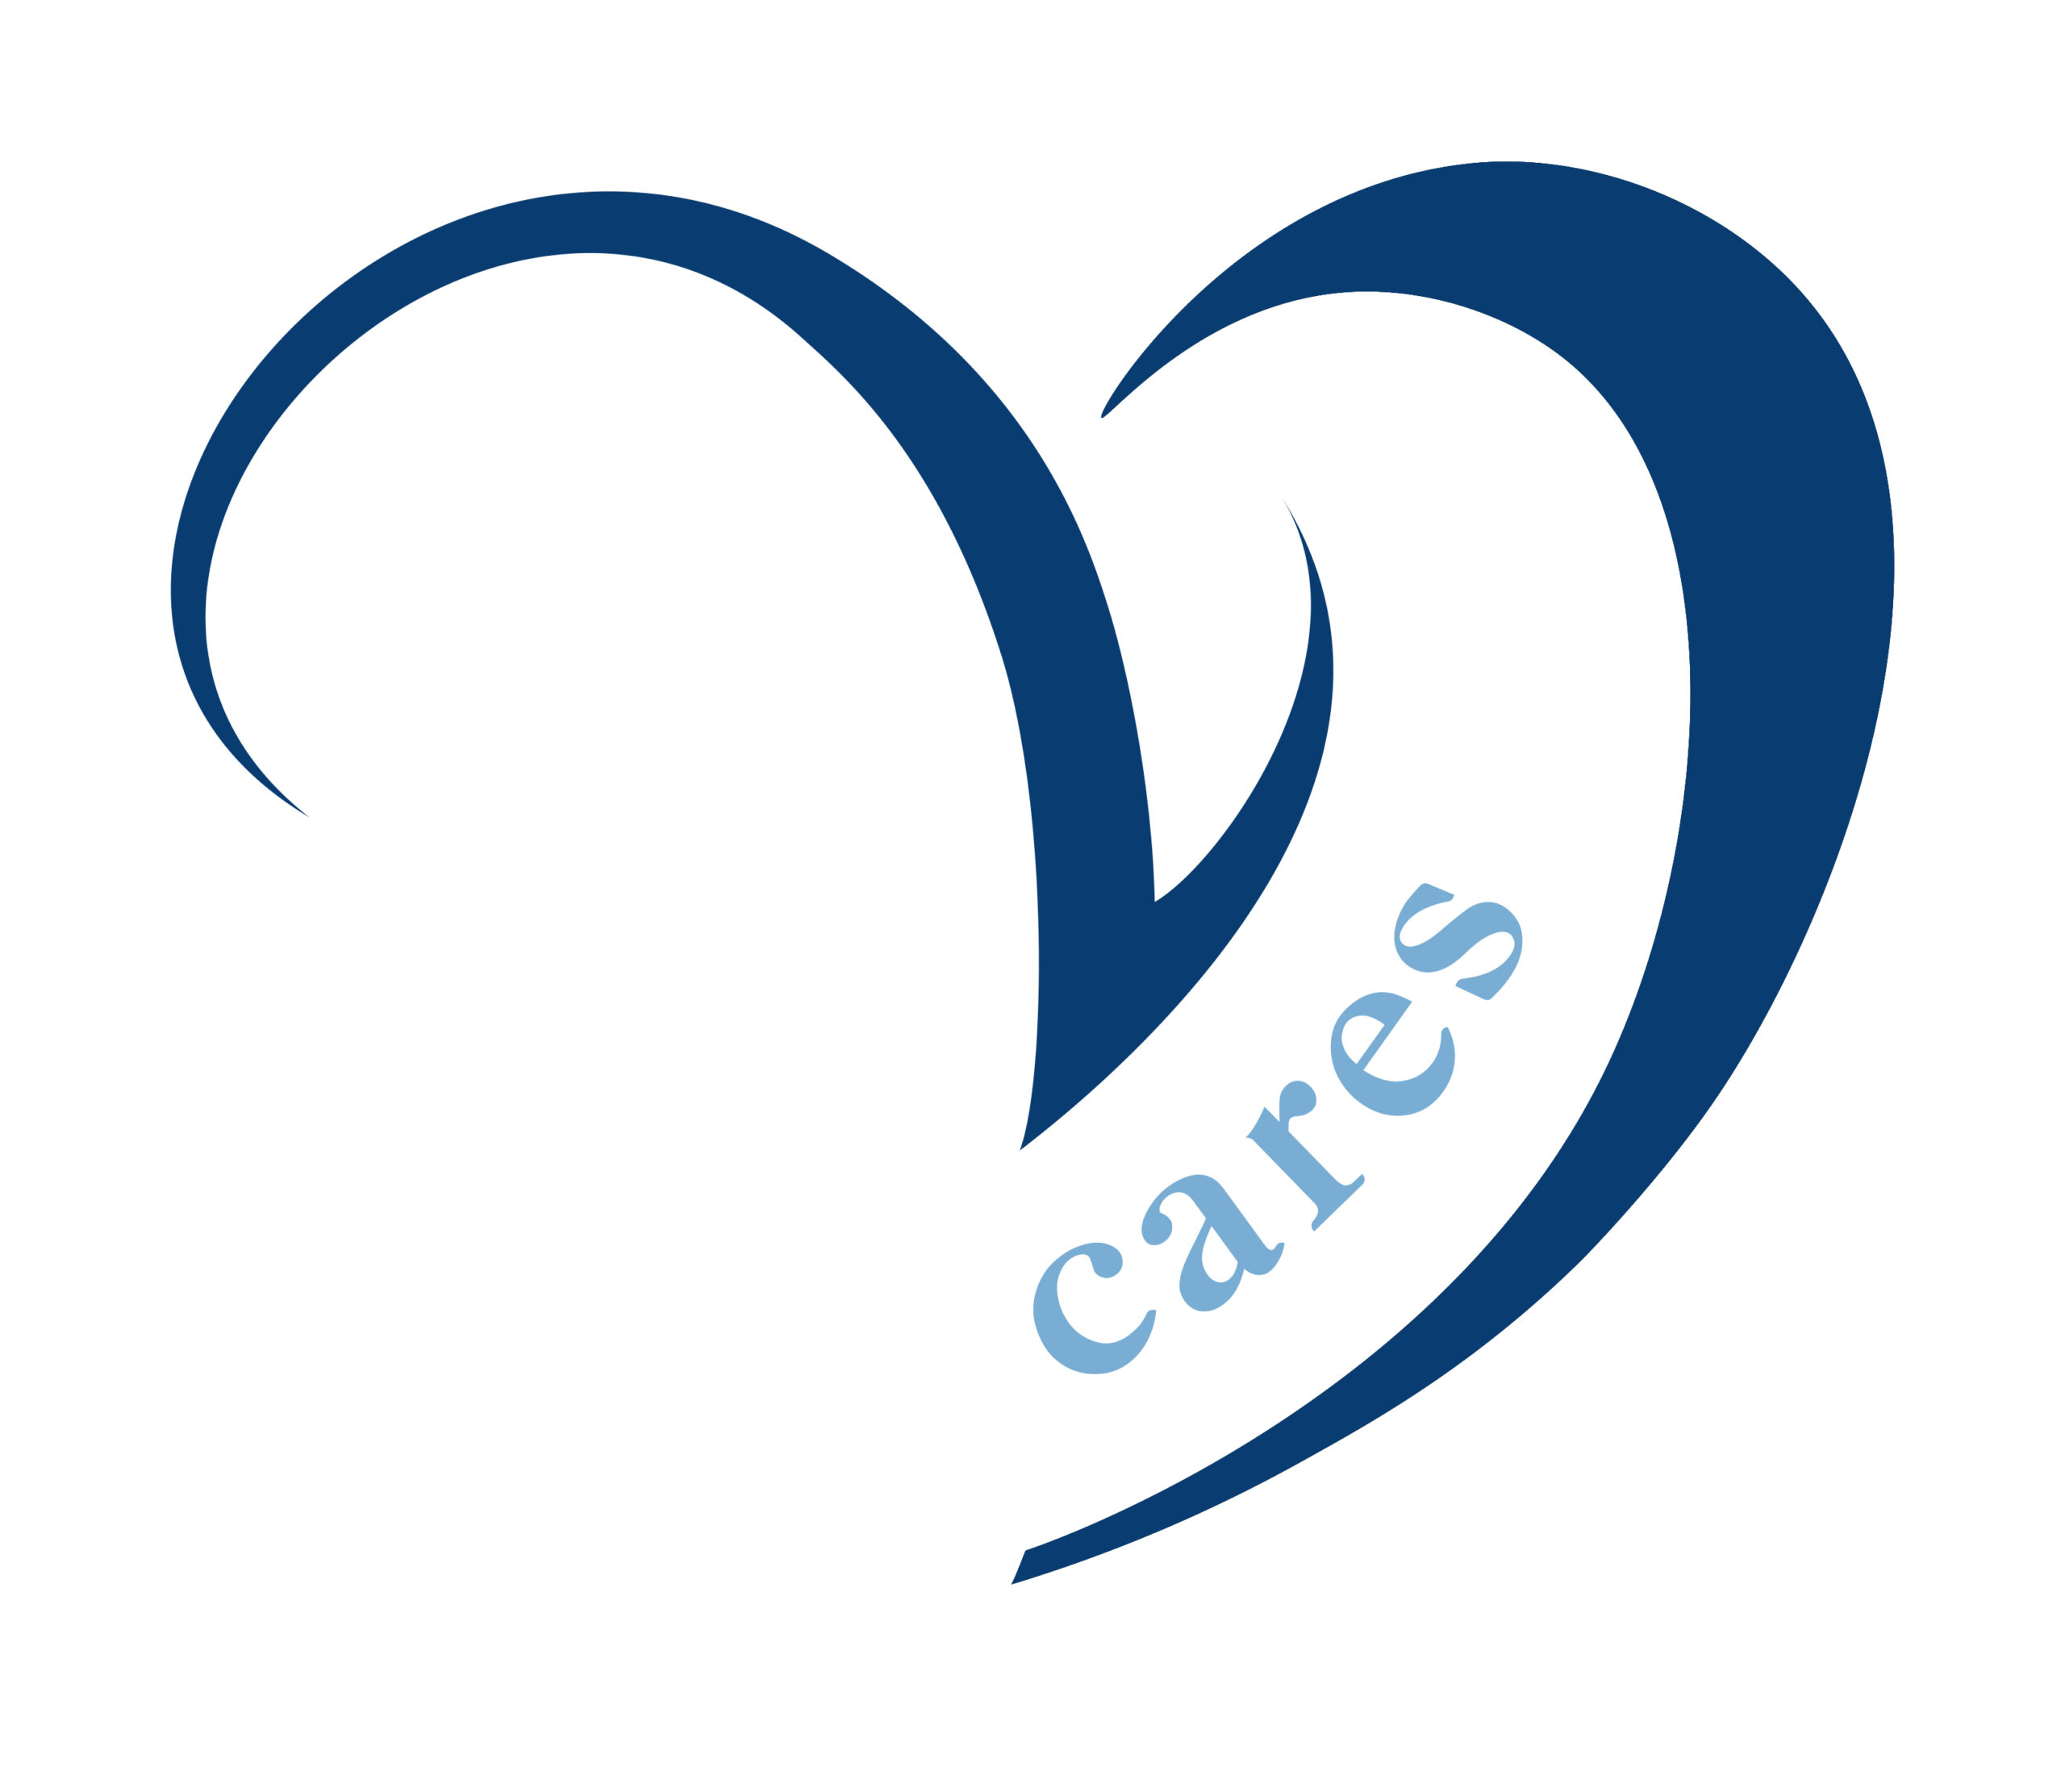 27th Investments Cares logo